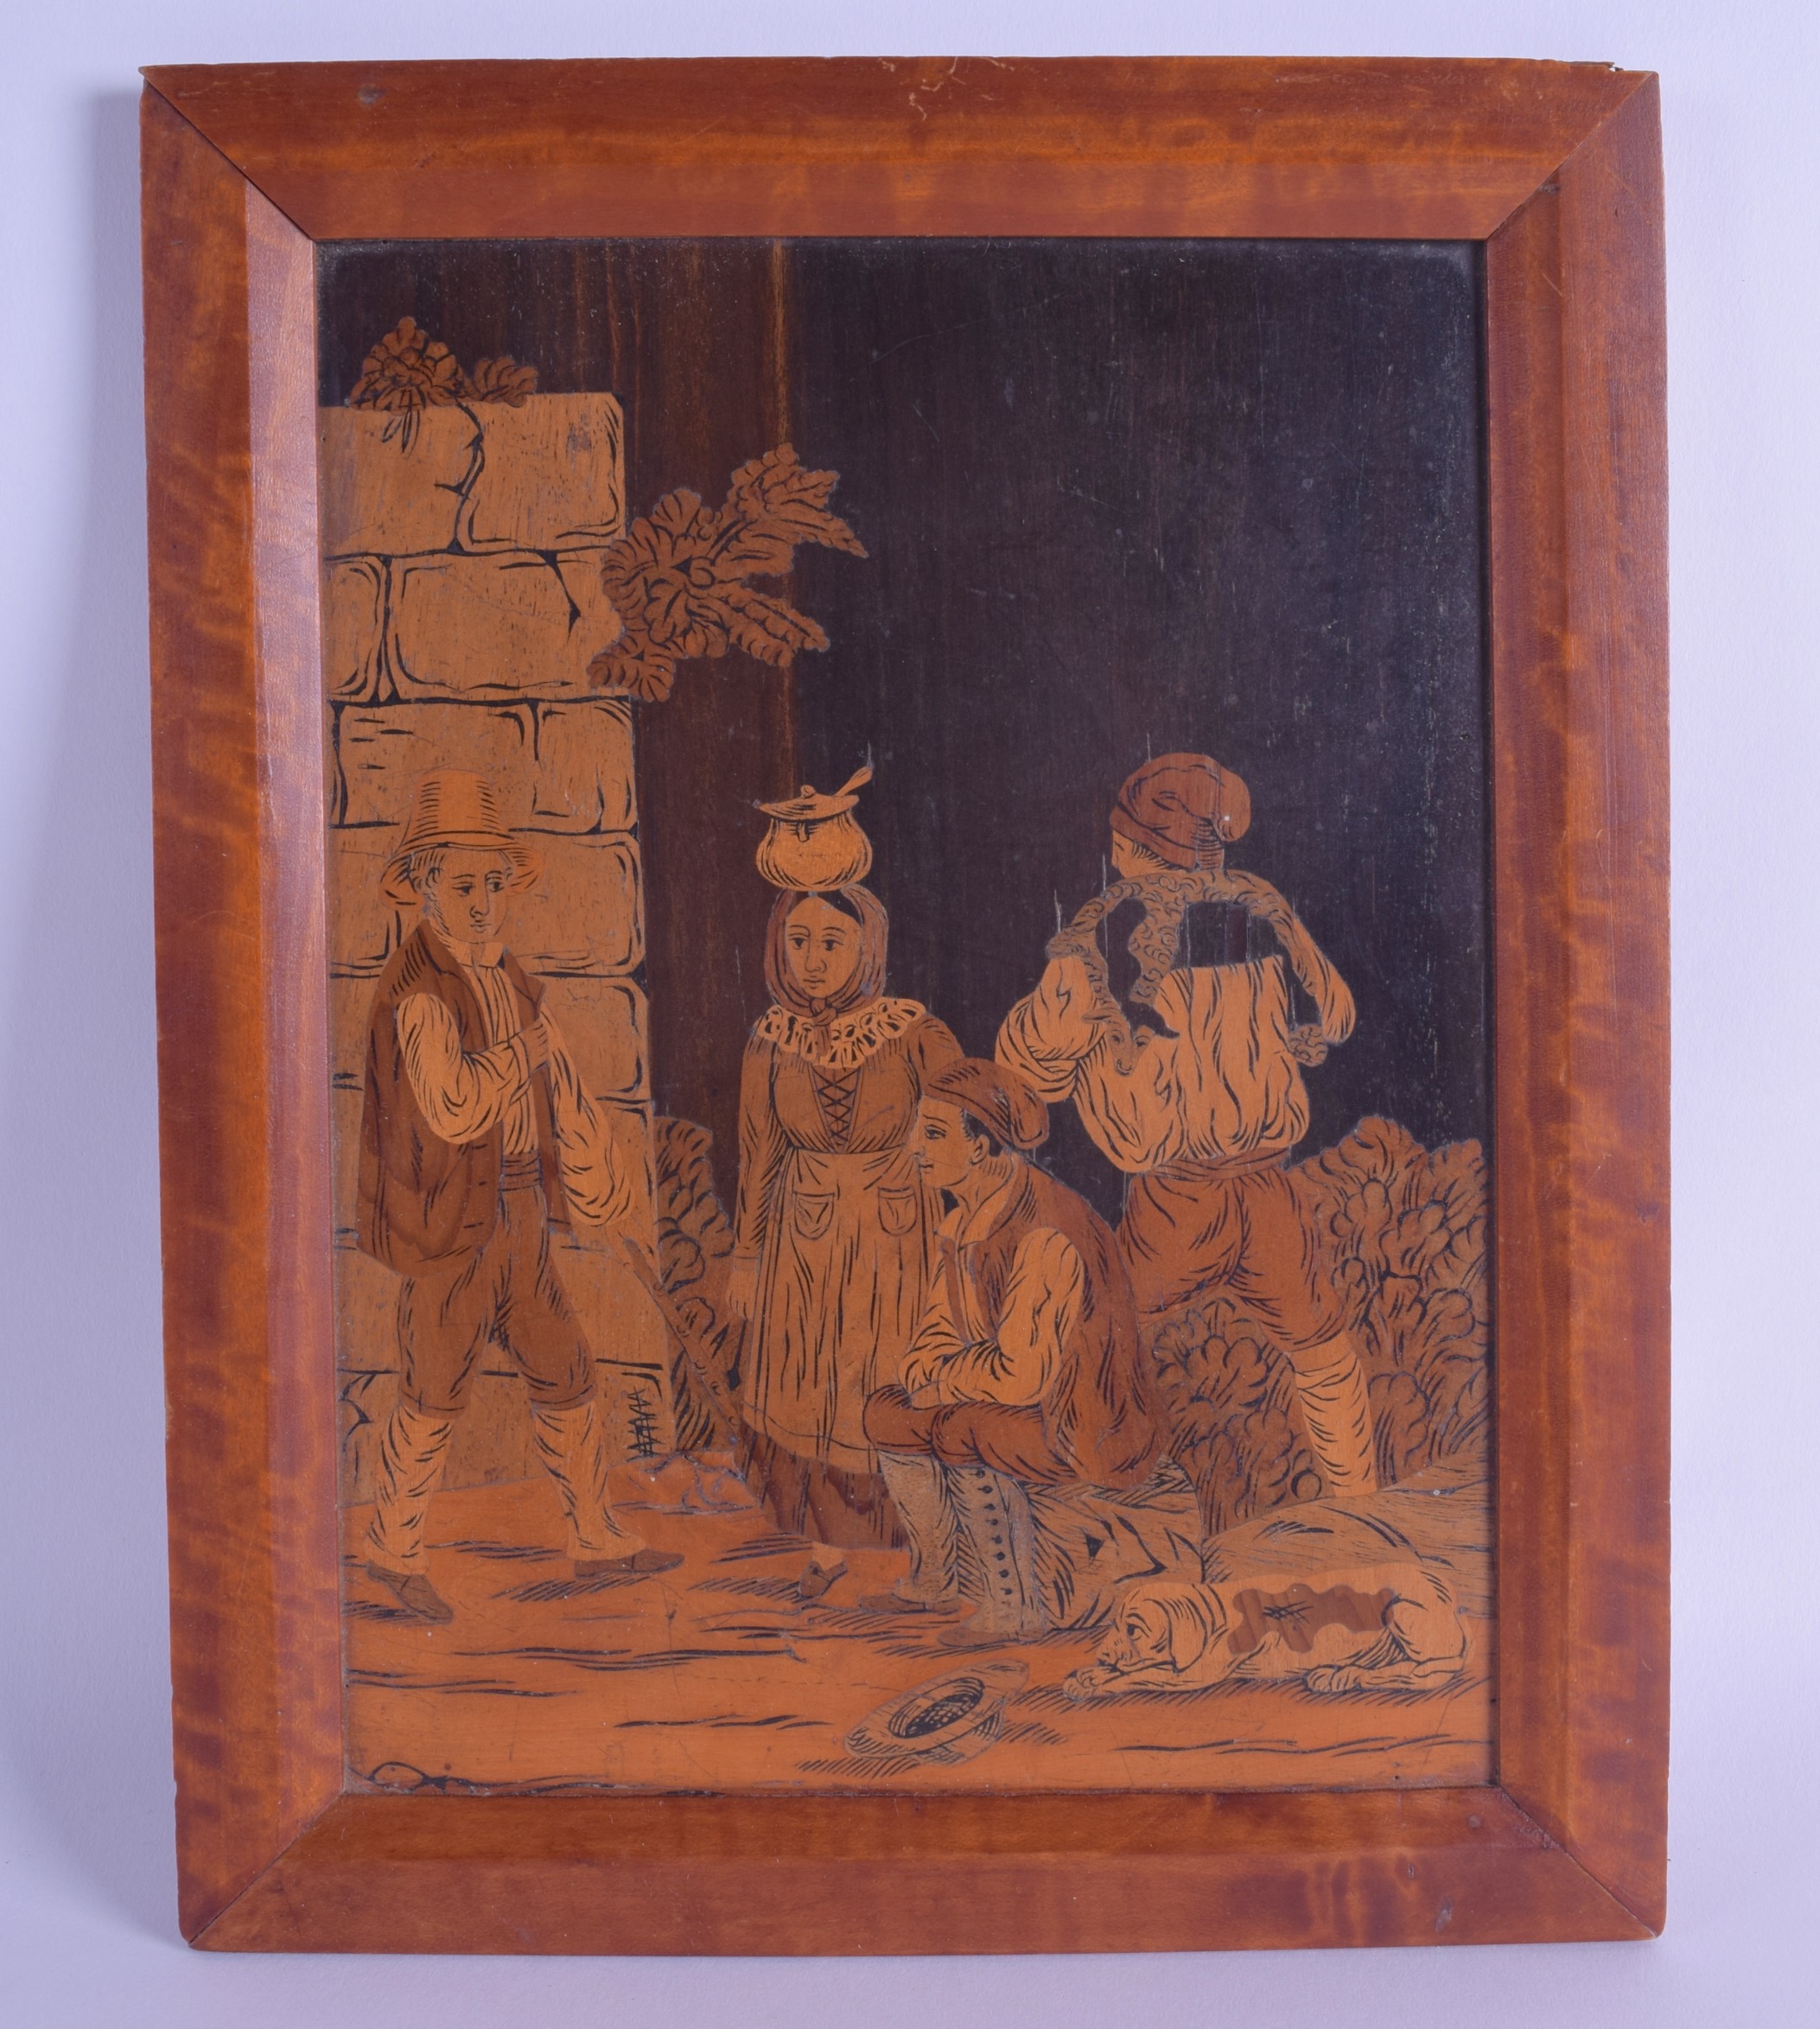 A 19TH CENTURY CONTINENTAL MARQUETRY WOODEN PANEL inlaid with four figures and a hound within an